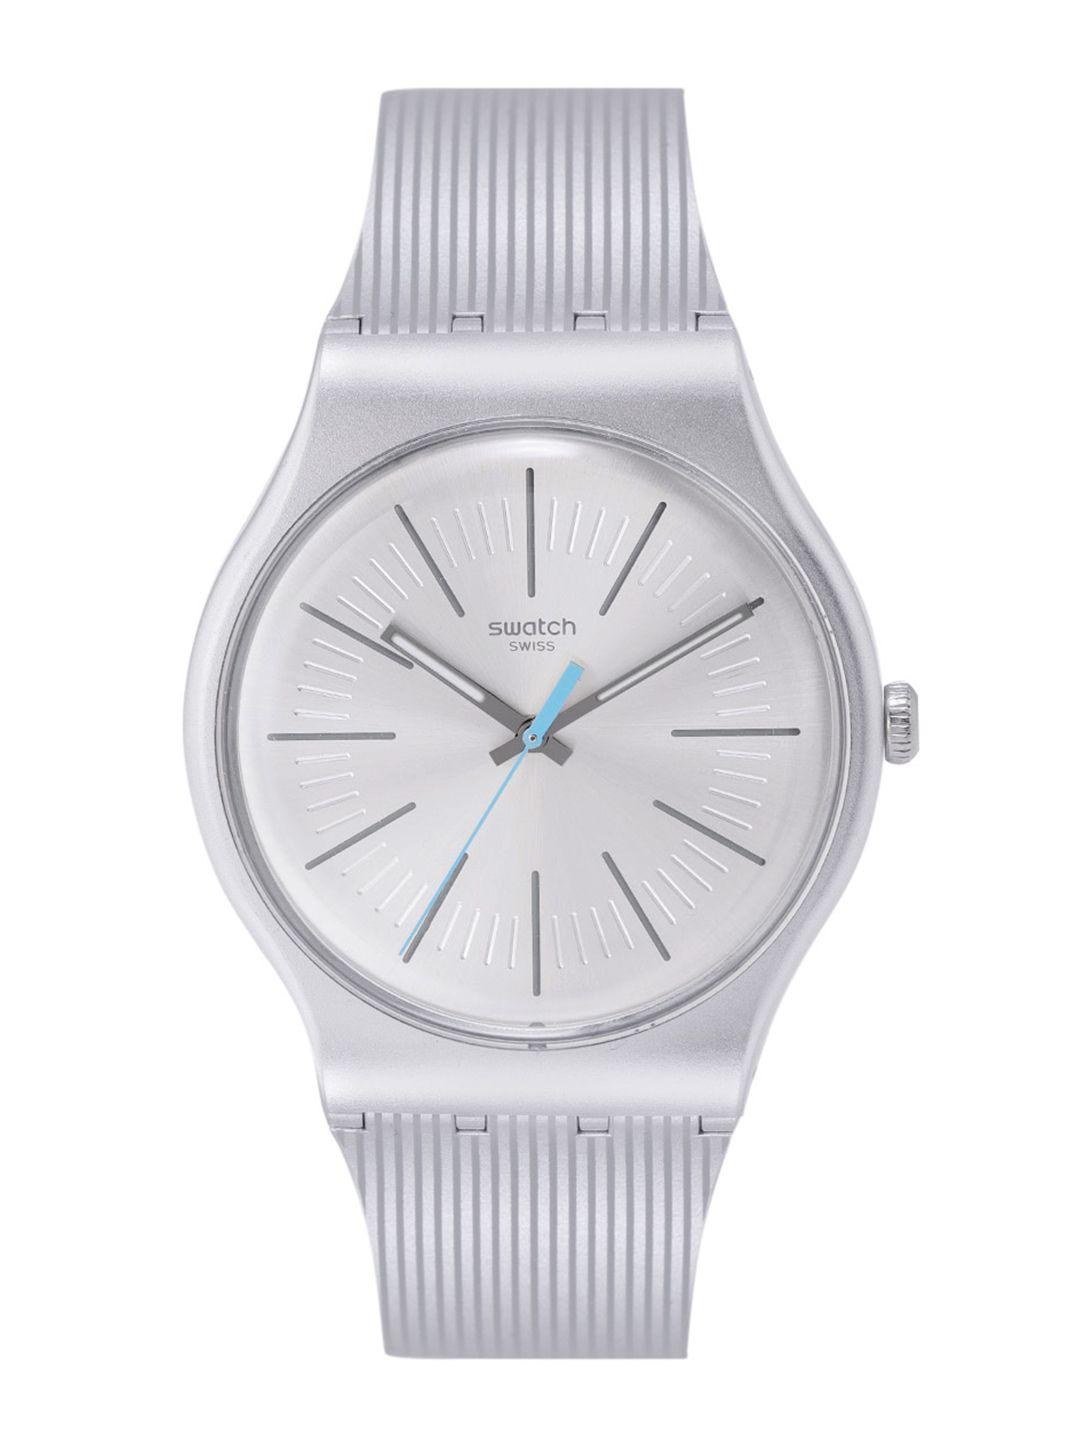 swatch-unisex-silver-toned-swiss-made-water-resistant-analogue-watch-suom114